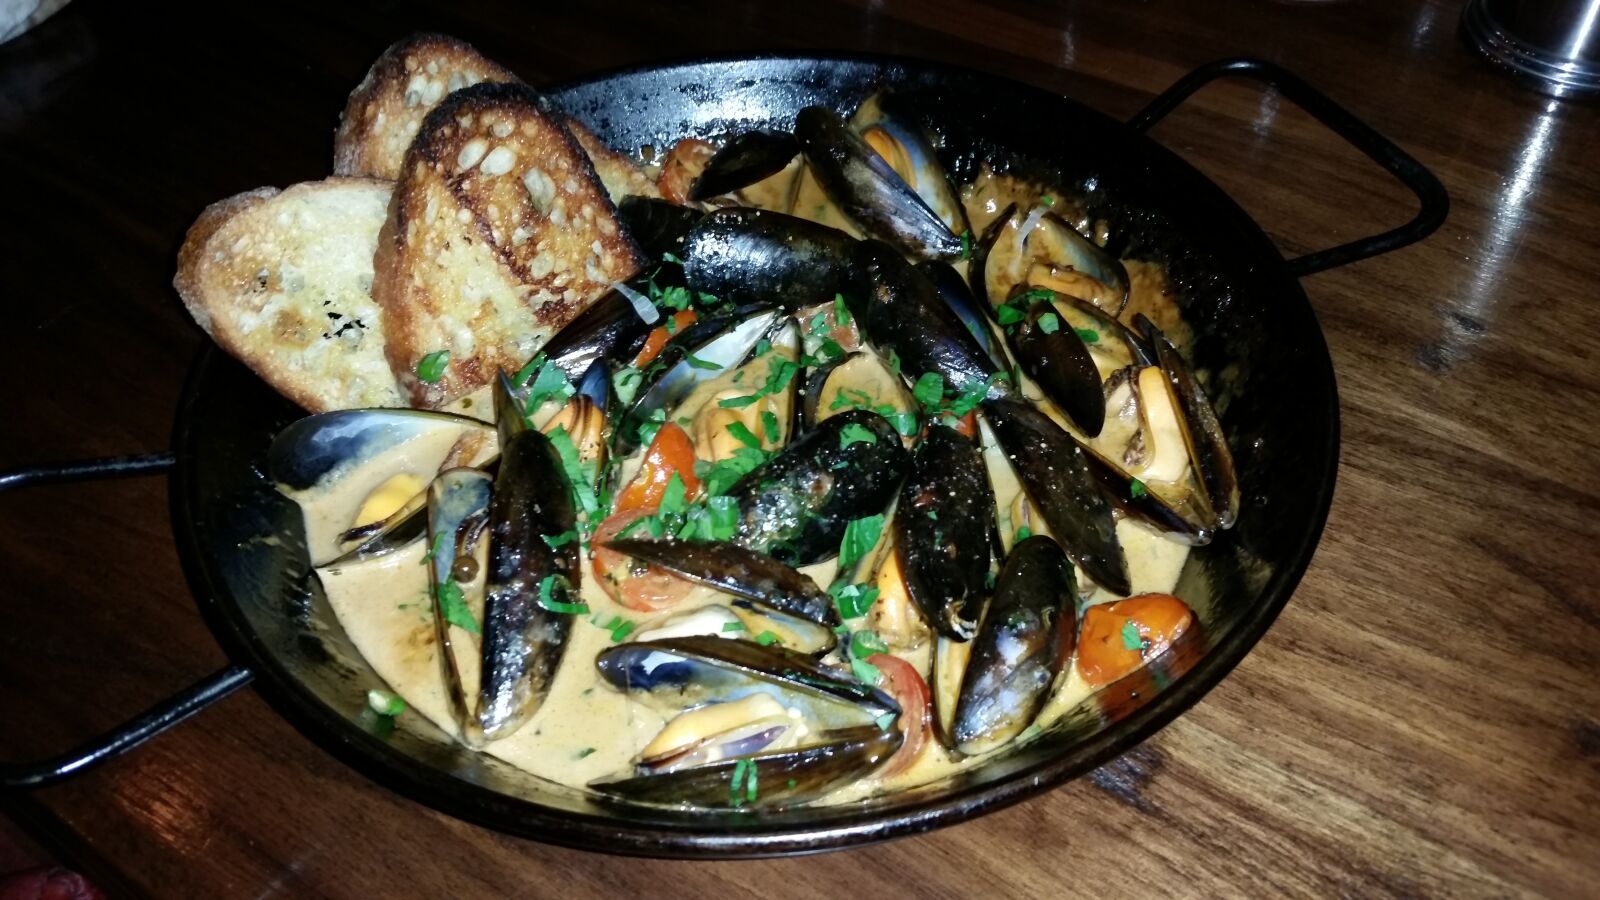 Samsung Galaxy S5 LTE-A sample photo. Mussels, bread, whiskey photography